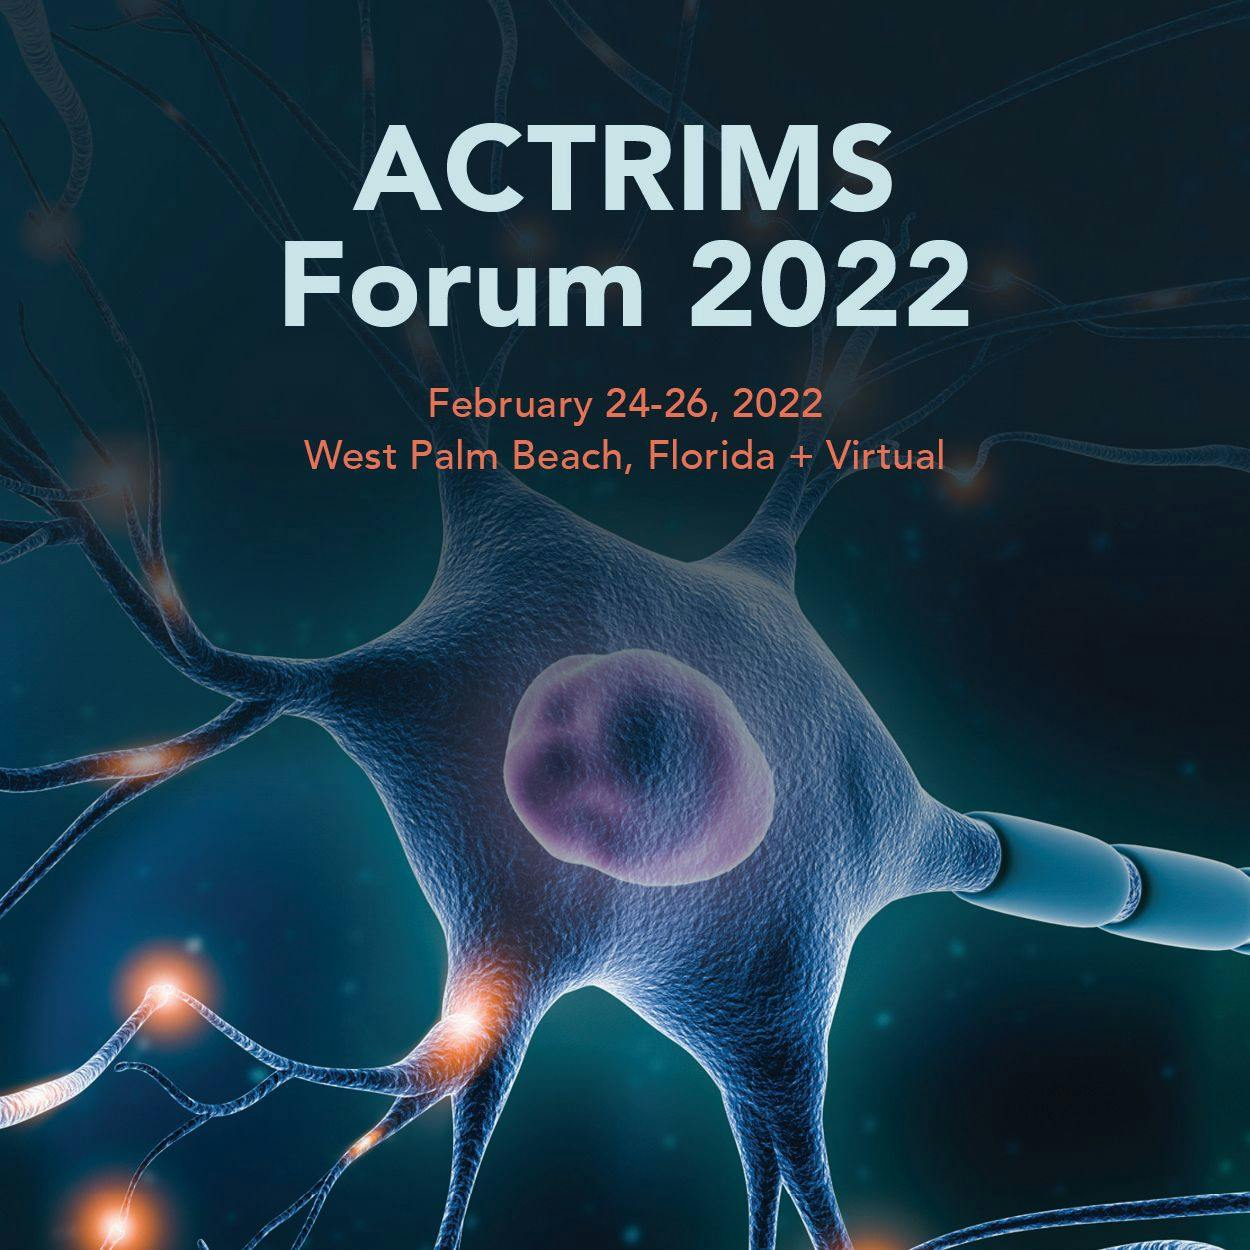 What to Expect at ACTRIMS Forum 2022